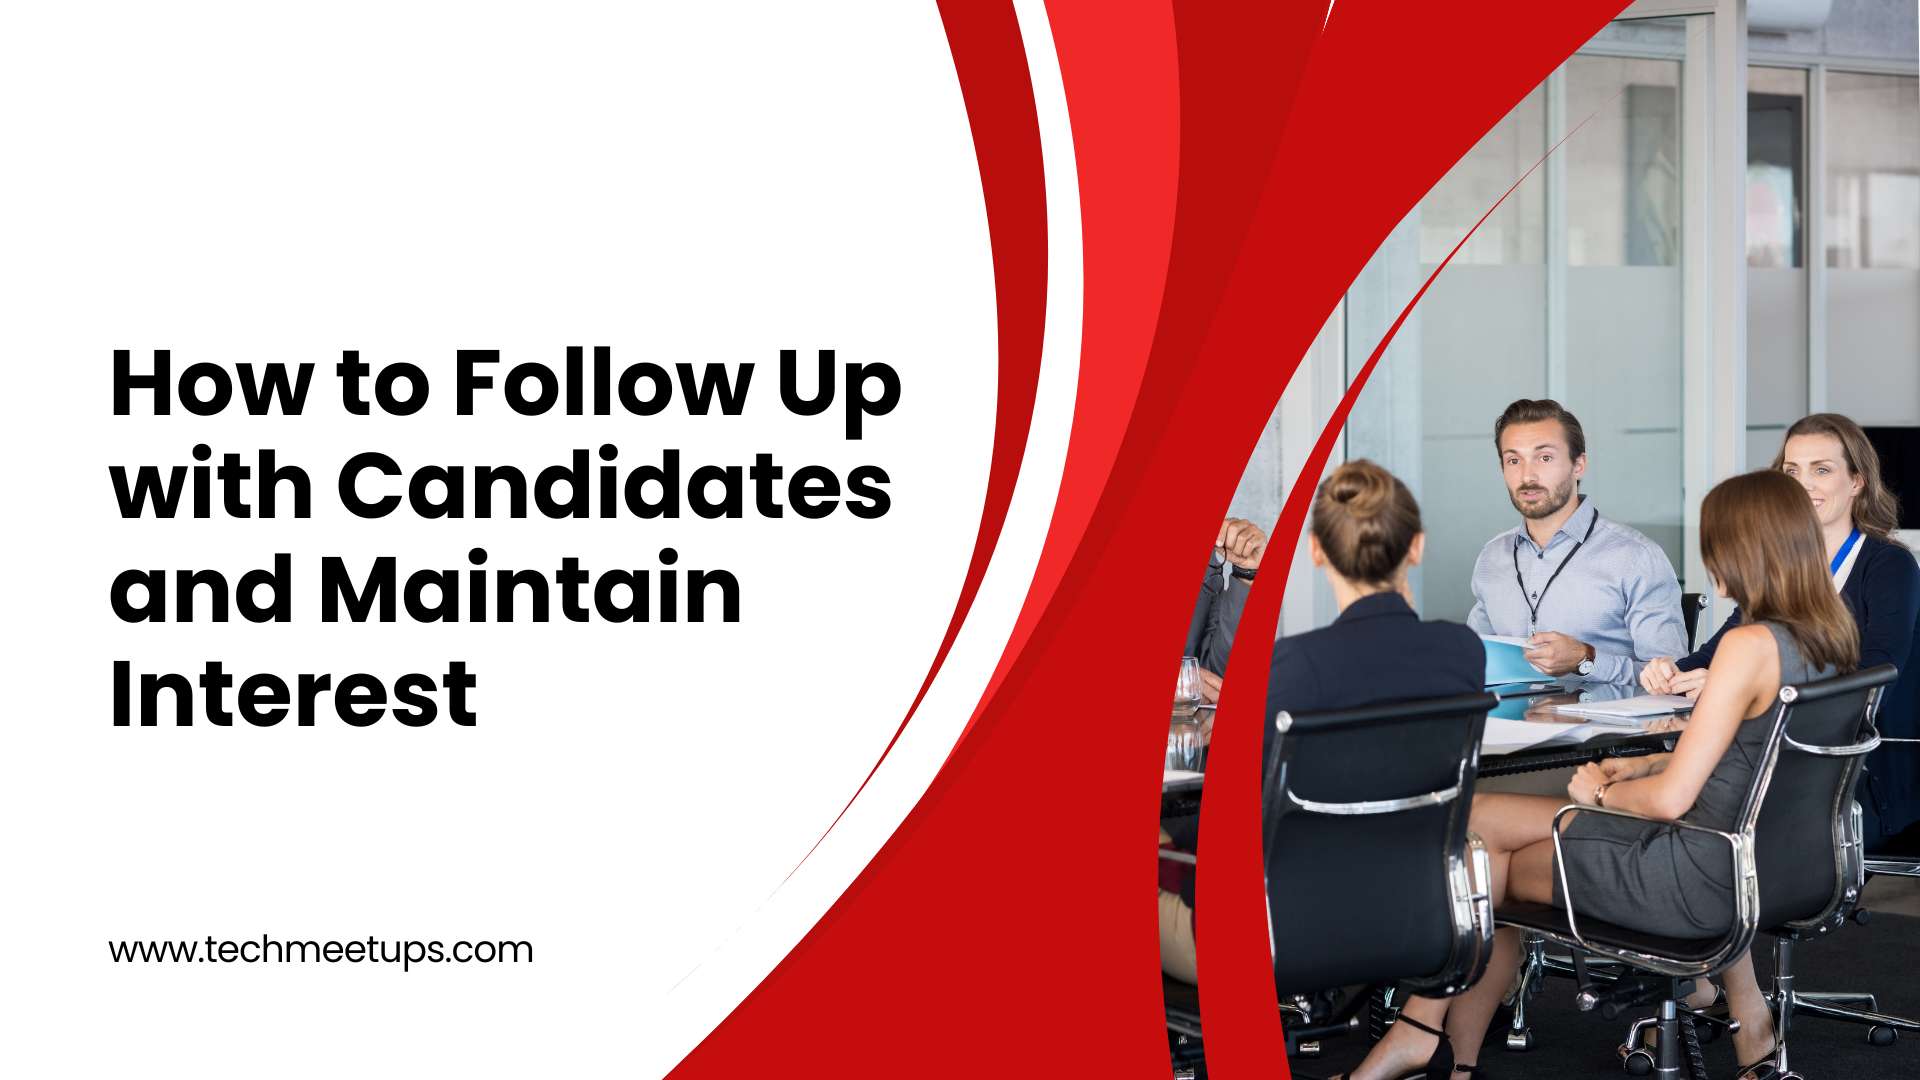 Post-Career Fair Strategies: How to Follow Up with Candidates and Maintain Interest